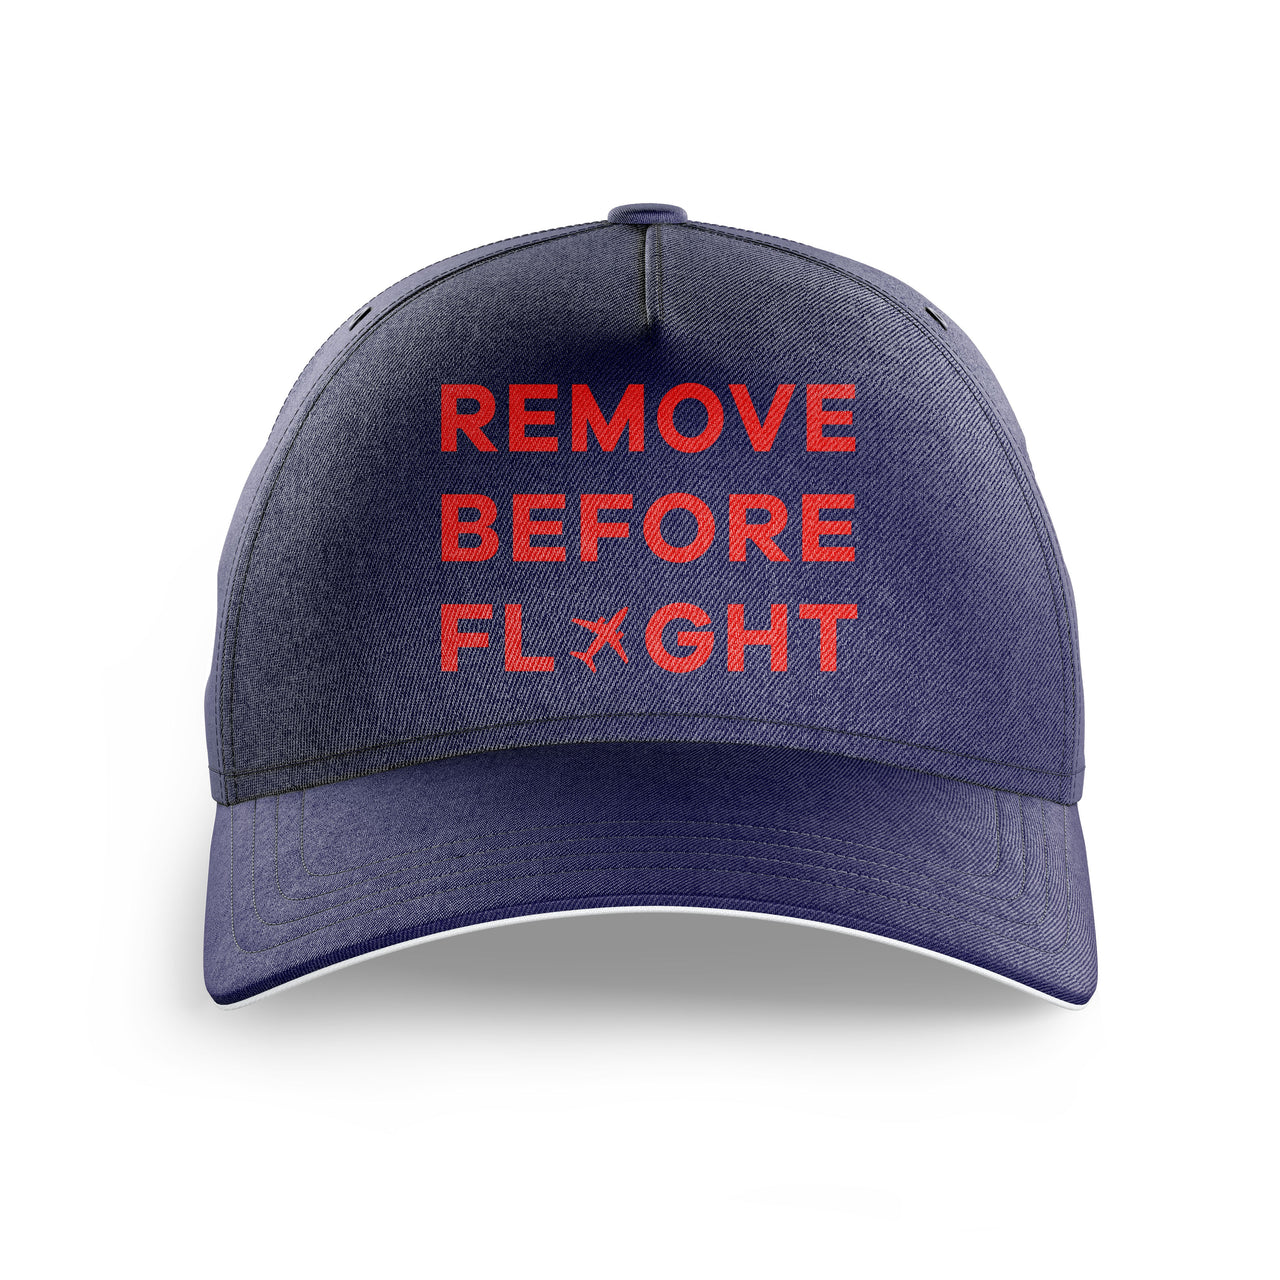 Remove Before Flight Printed Hats